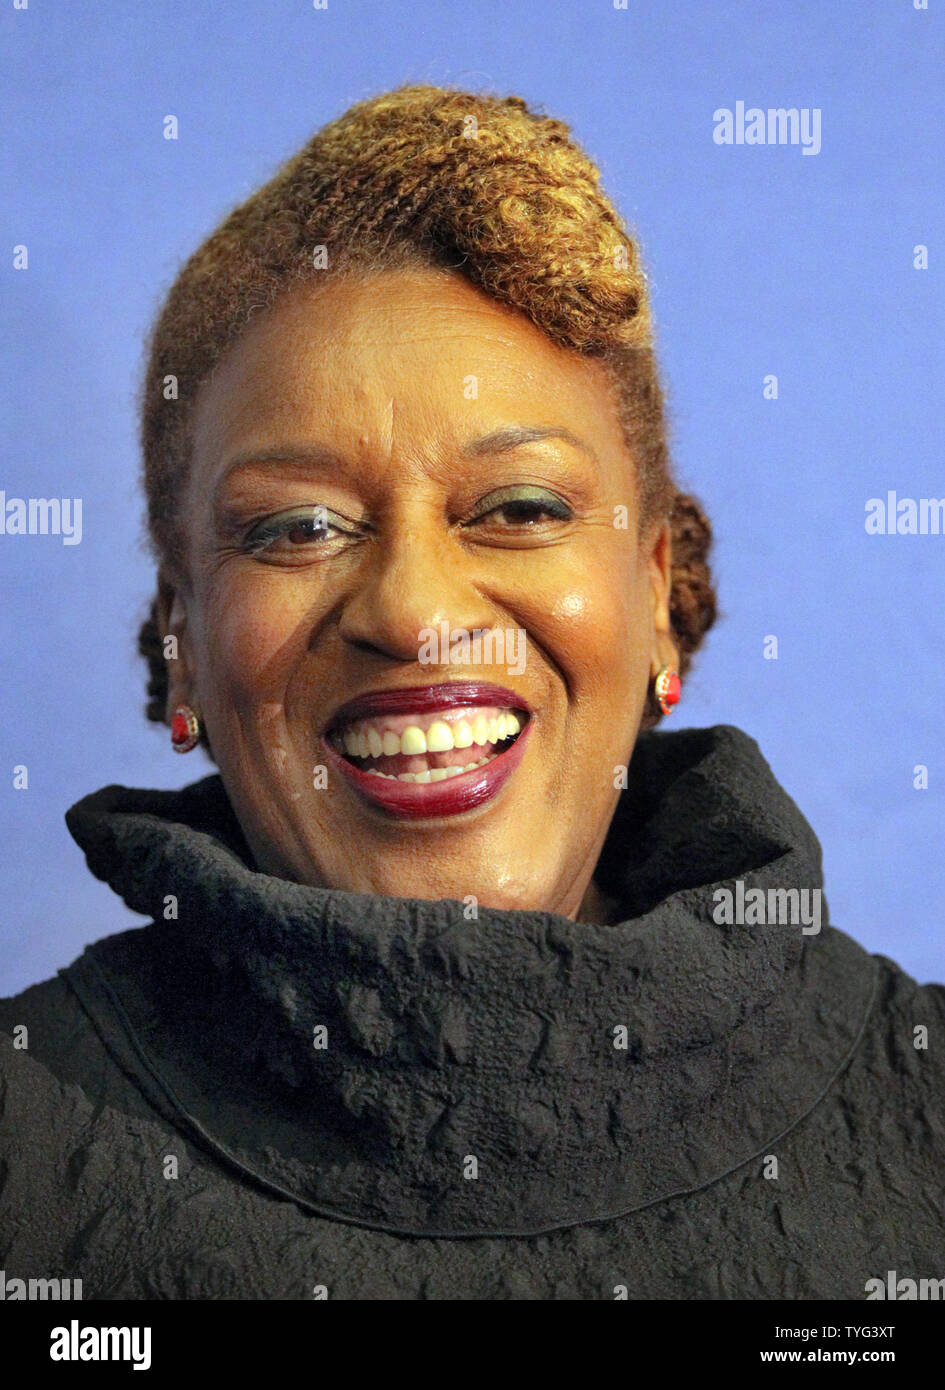 Actor C. C. H. Pounder arrives  on the red carpet at the National WWII Museum in New Orleans for the premiere of the new television series 'NCIS: New Orleans' airing on CBS this fall, September 17, 2014.    UPI/A.J. Sisco Stock Photo